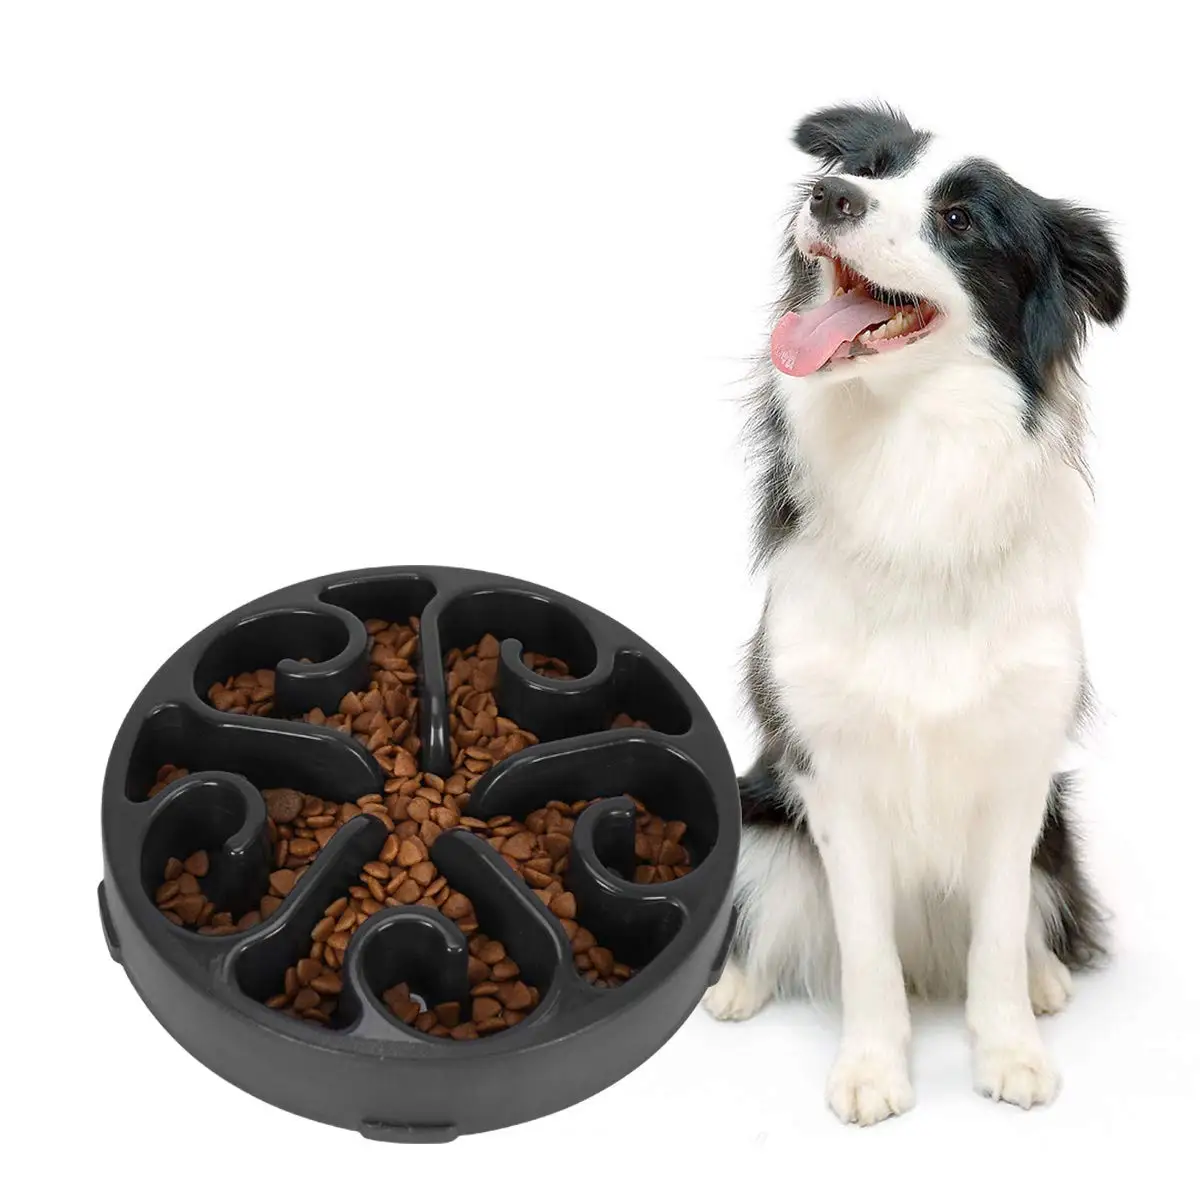 

Dog Cat Bowl Slow Feeder Portable Non-Slip Washable Cat Dogs Healthy Feeding Drinking Maze Bowls Plate Pets Slow Eating Supplies